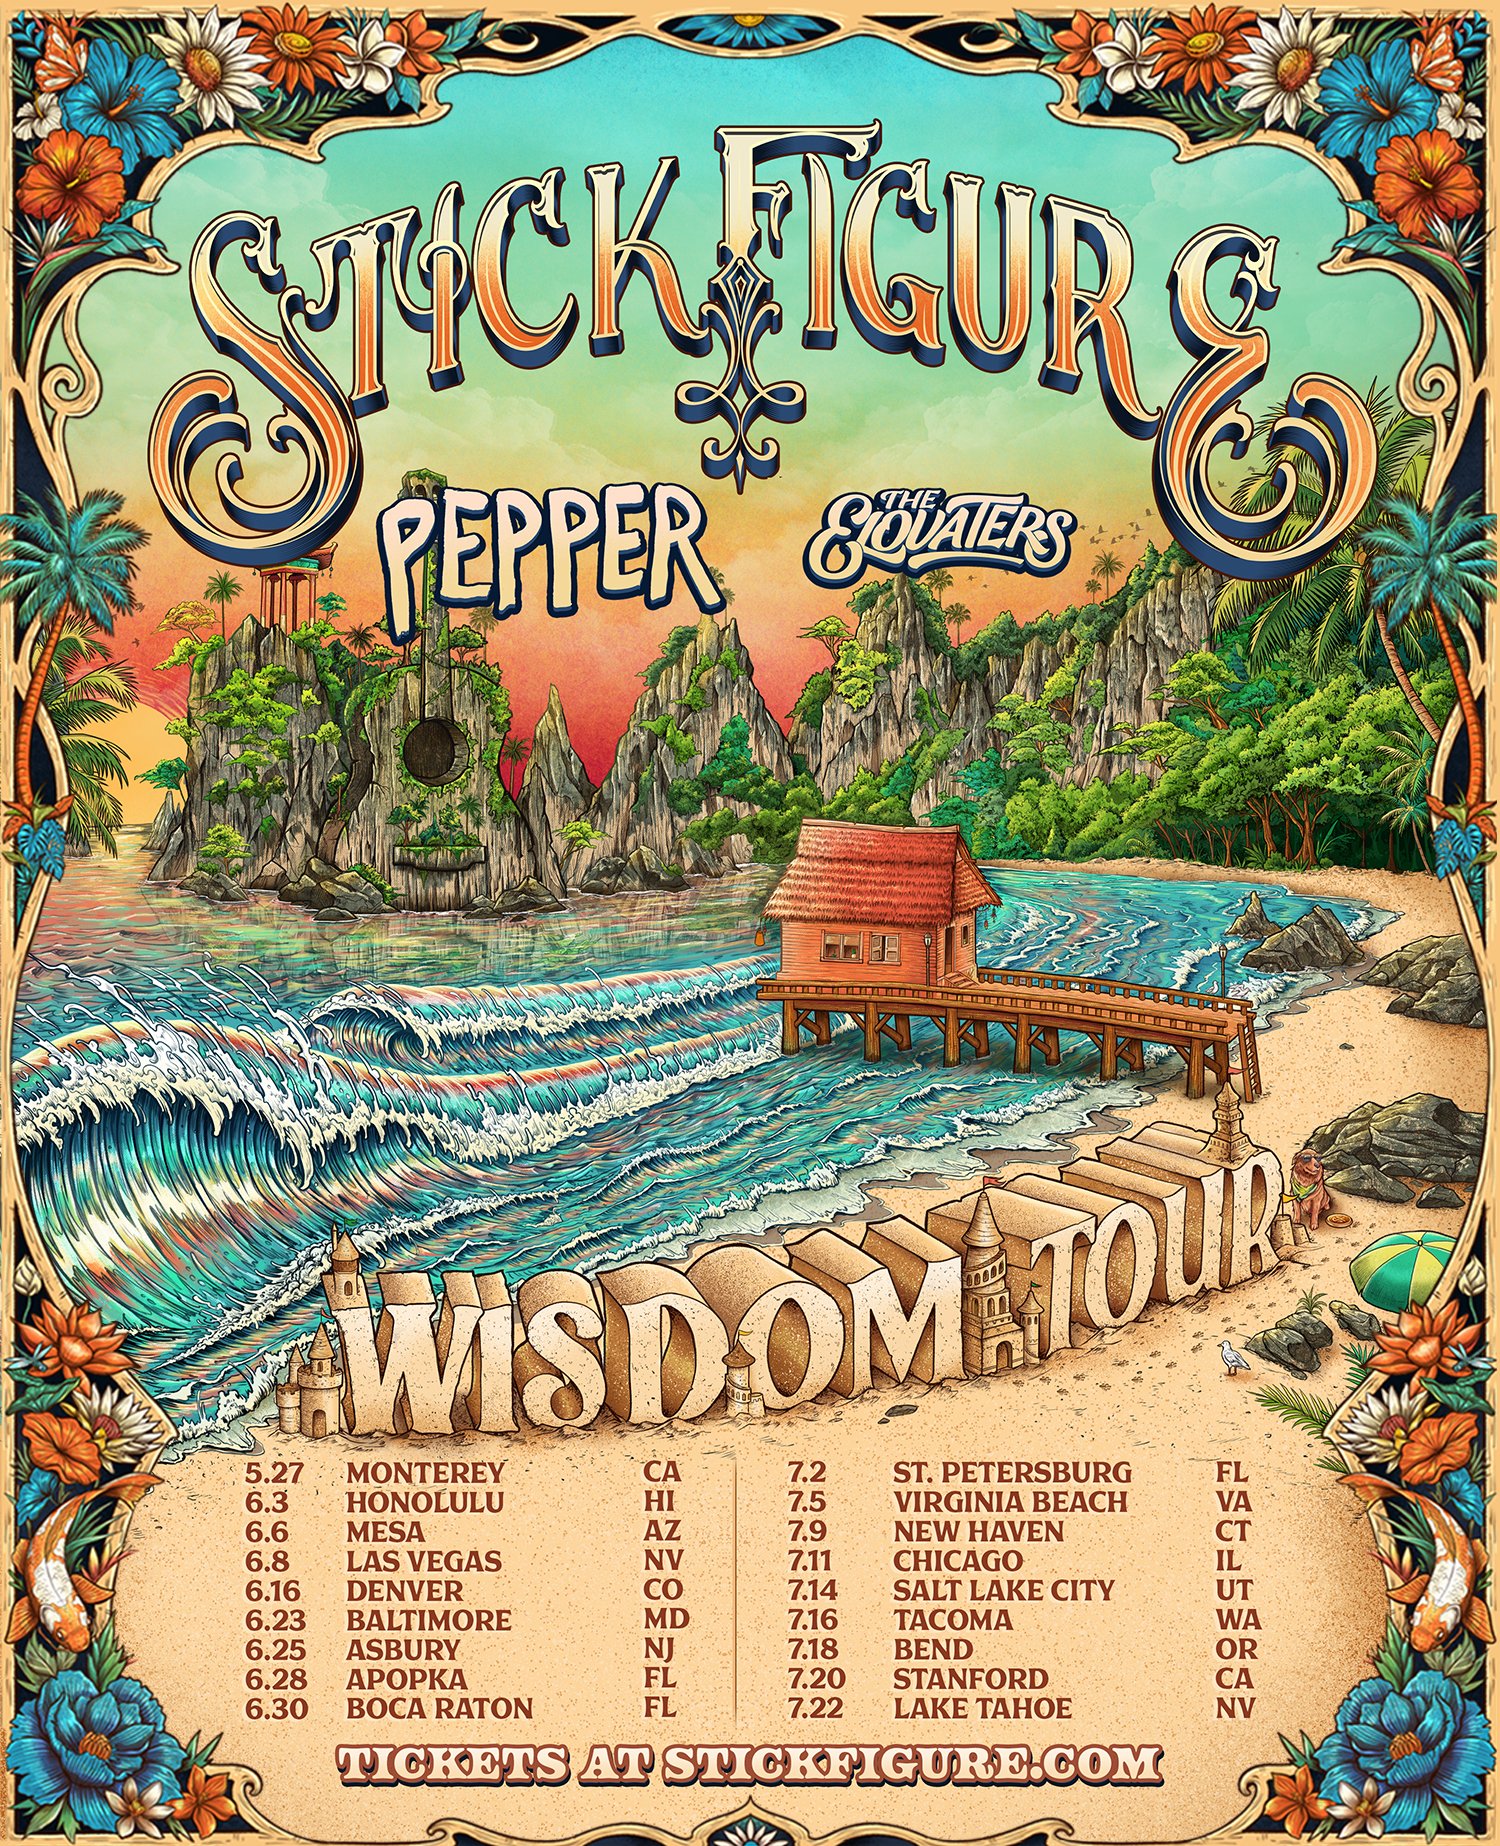 Stick Figure’s “Wisdom Tour” ft. Pepper and The Elovaters is going to